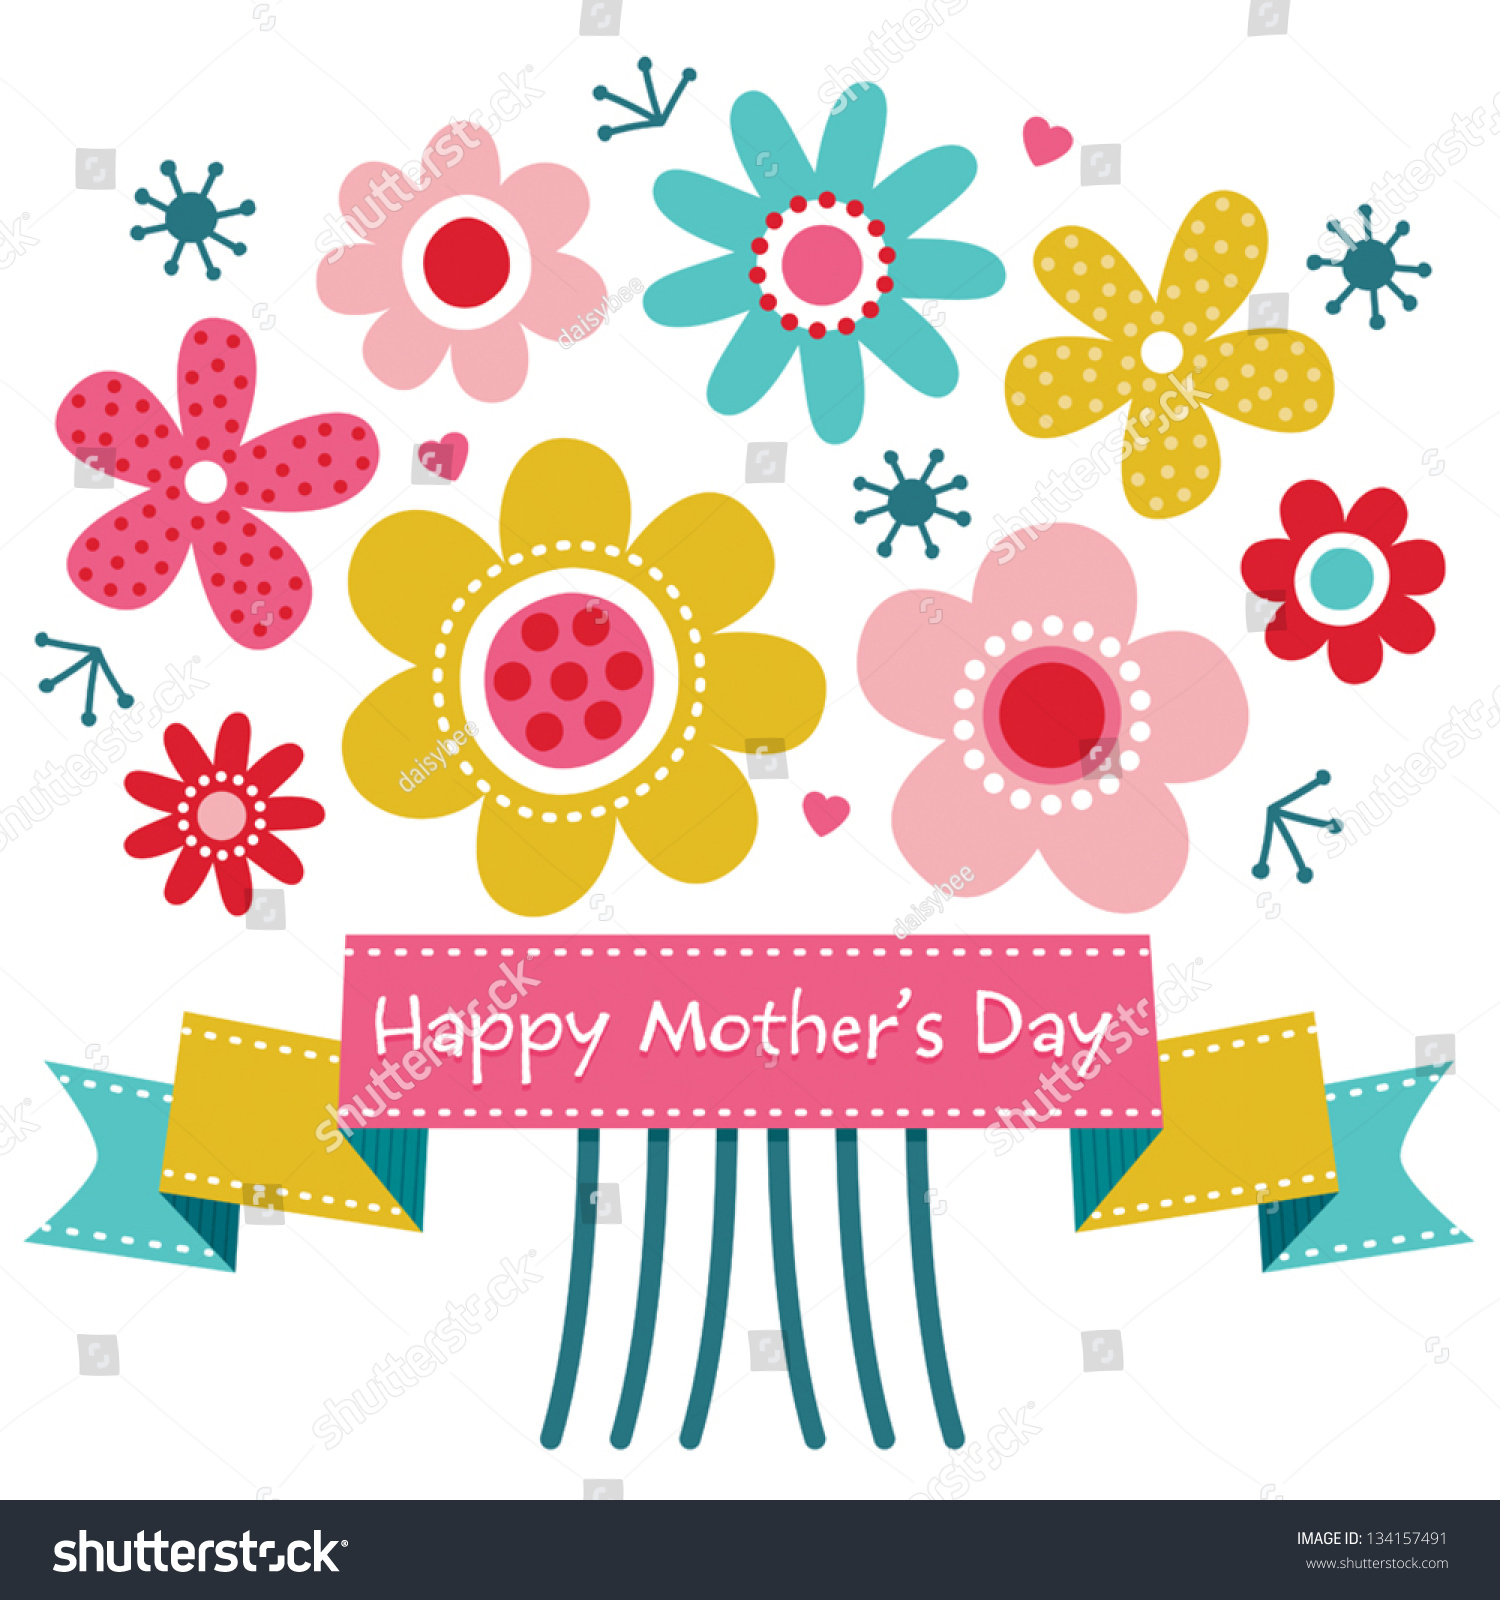 clip art for mother's day cards - photo #38